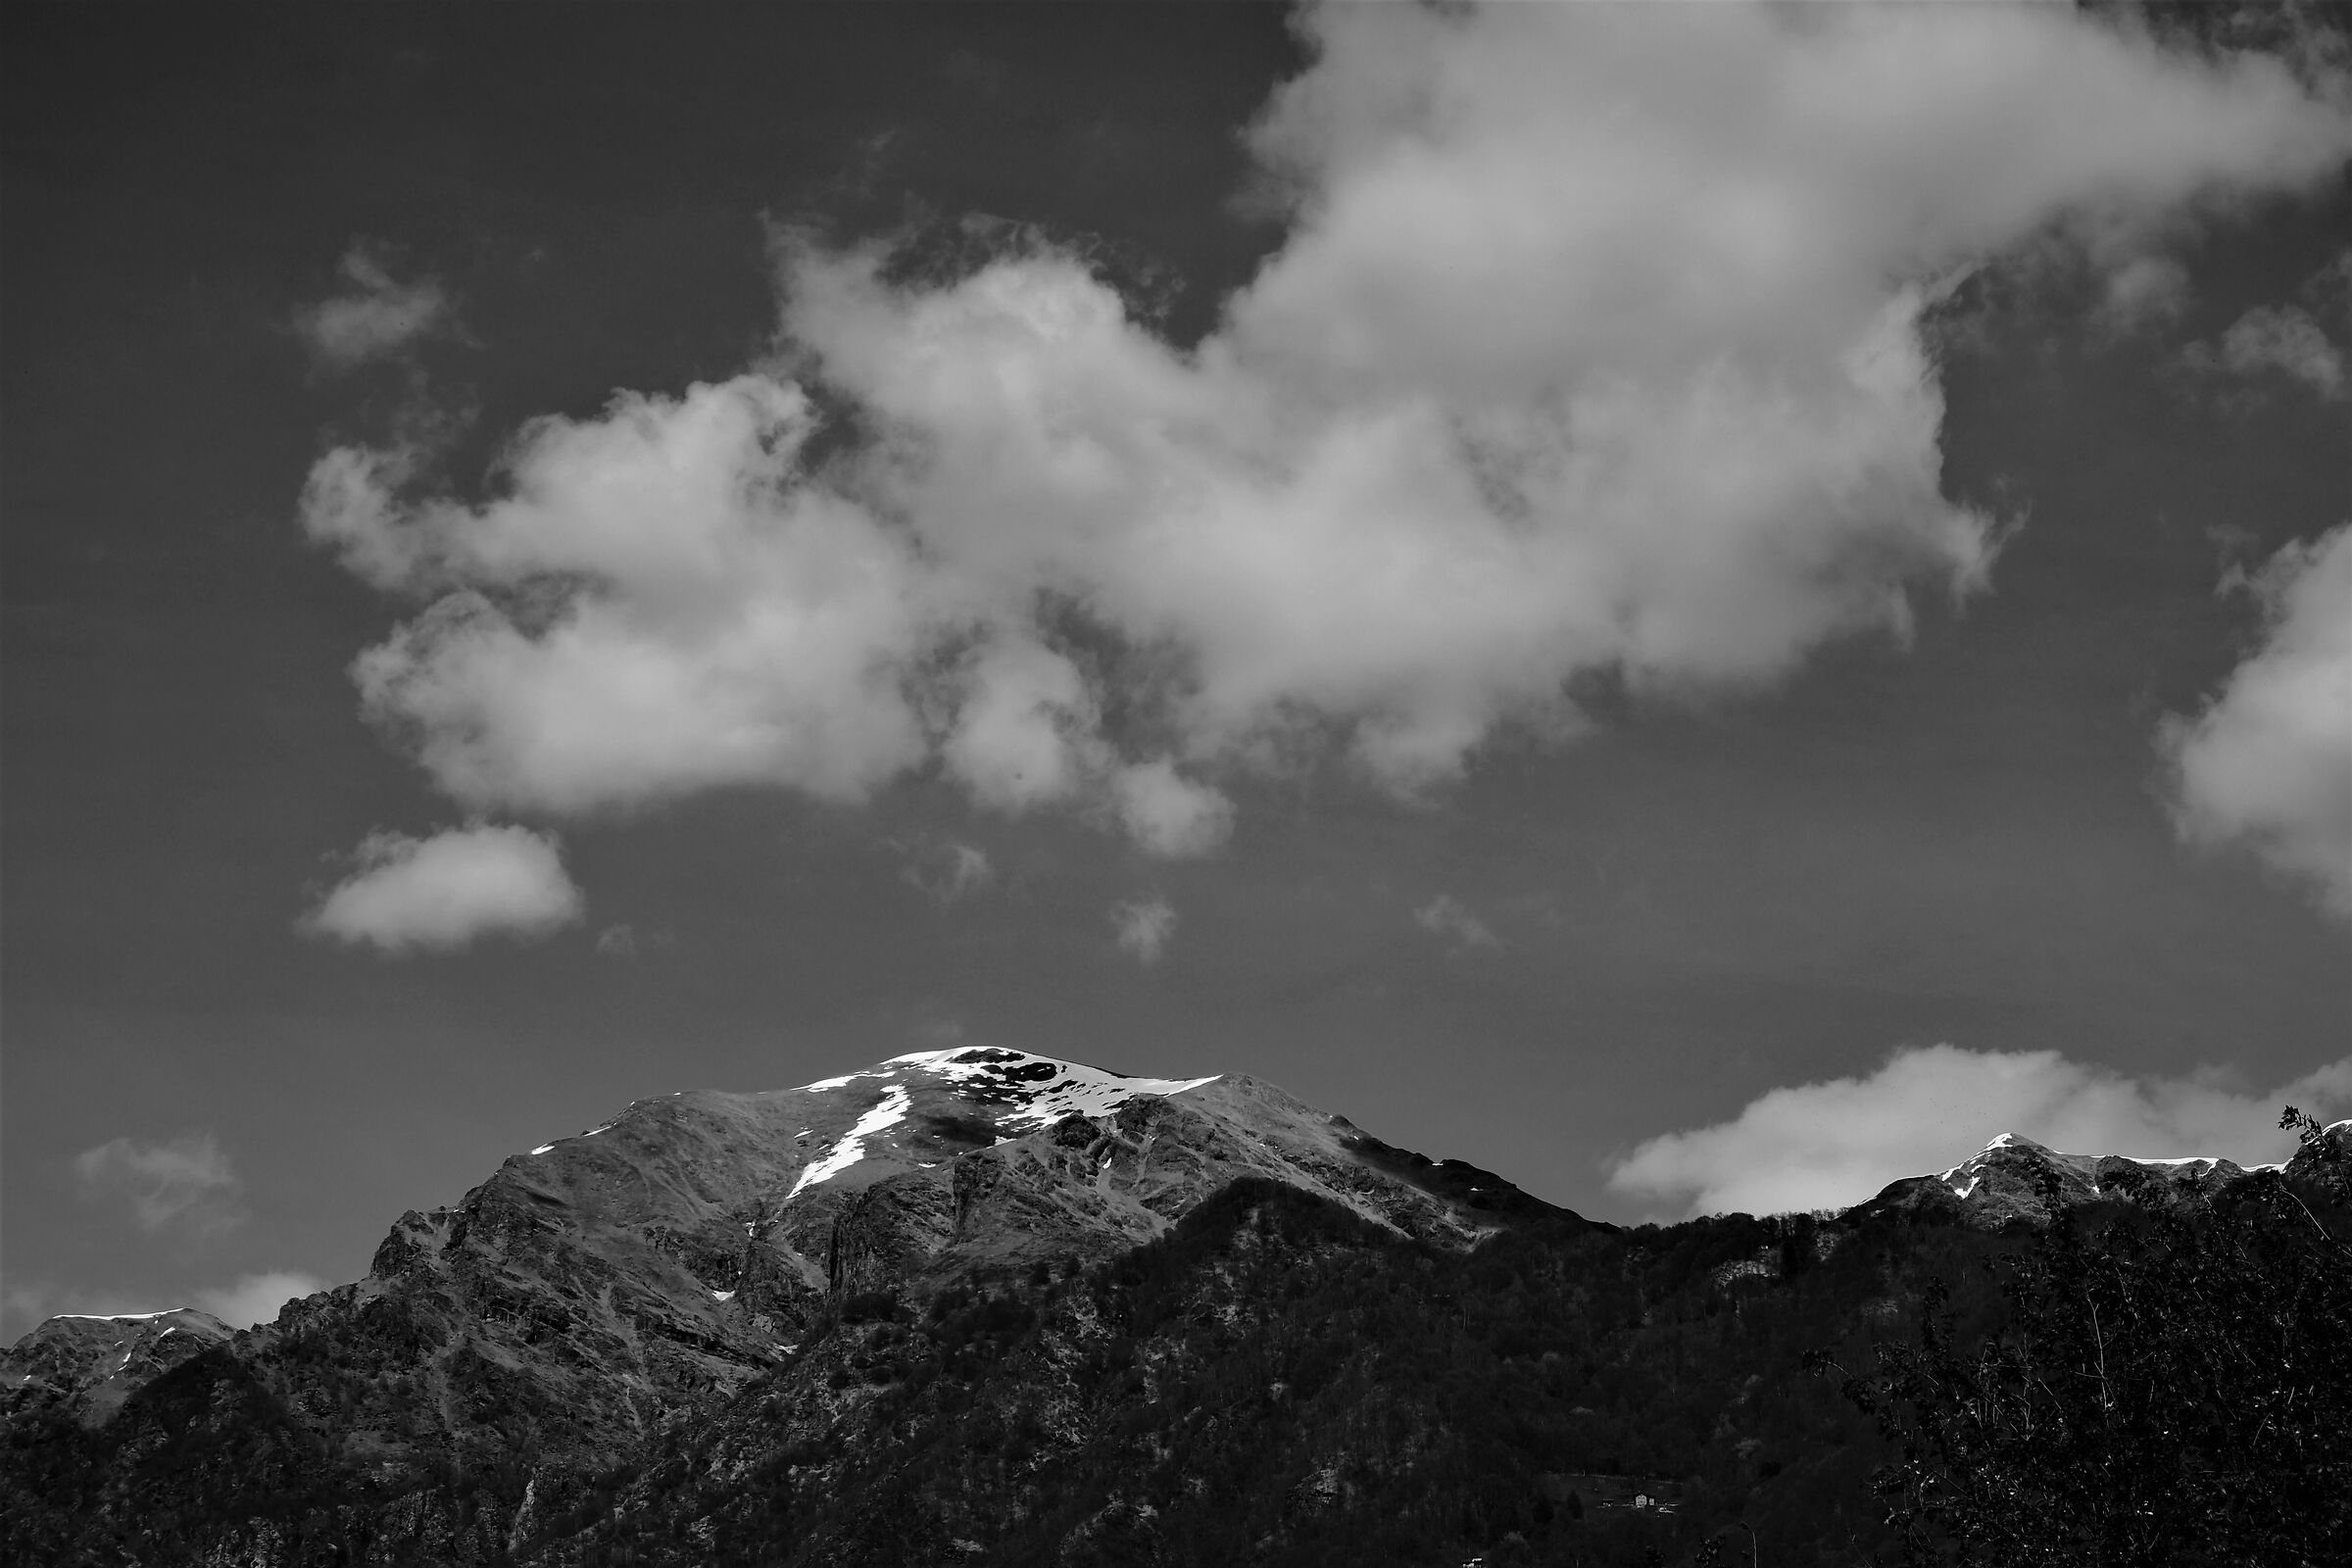 The Mountain in Black and White...